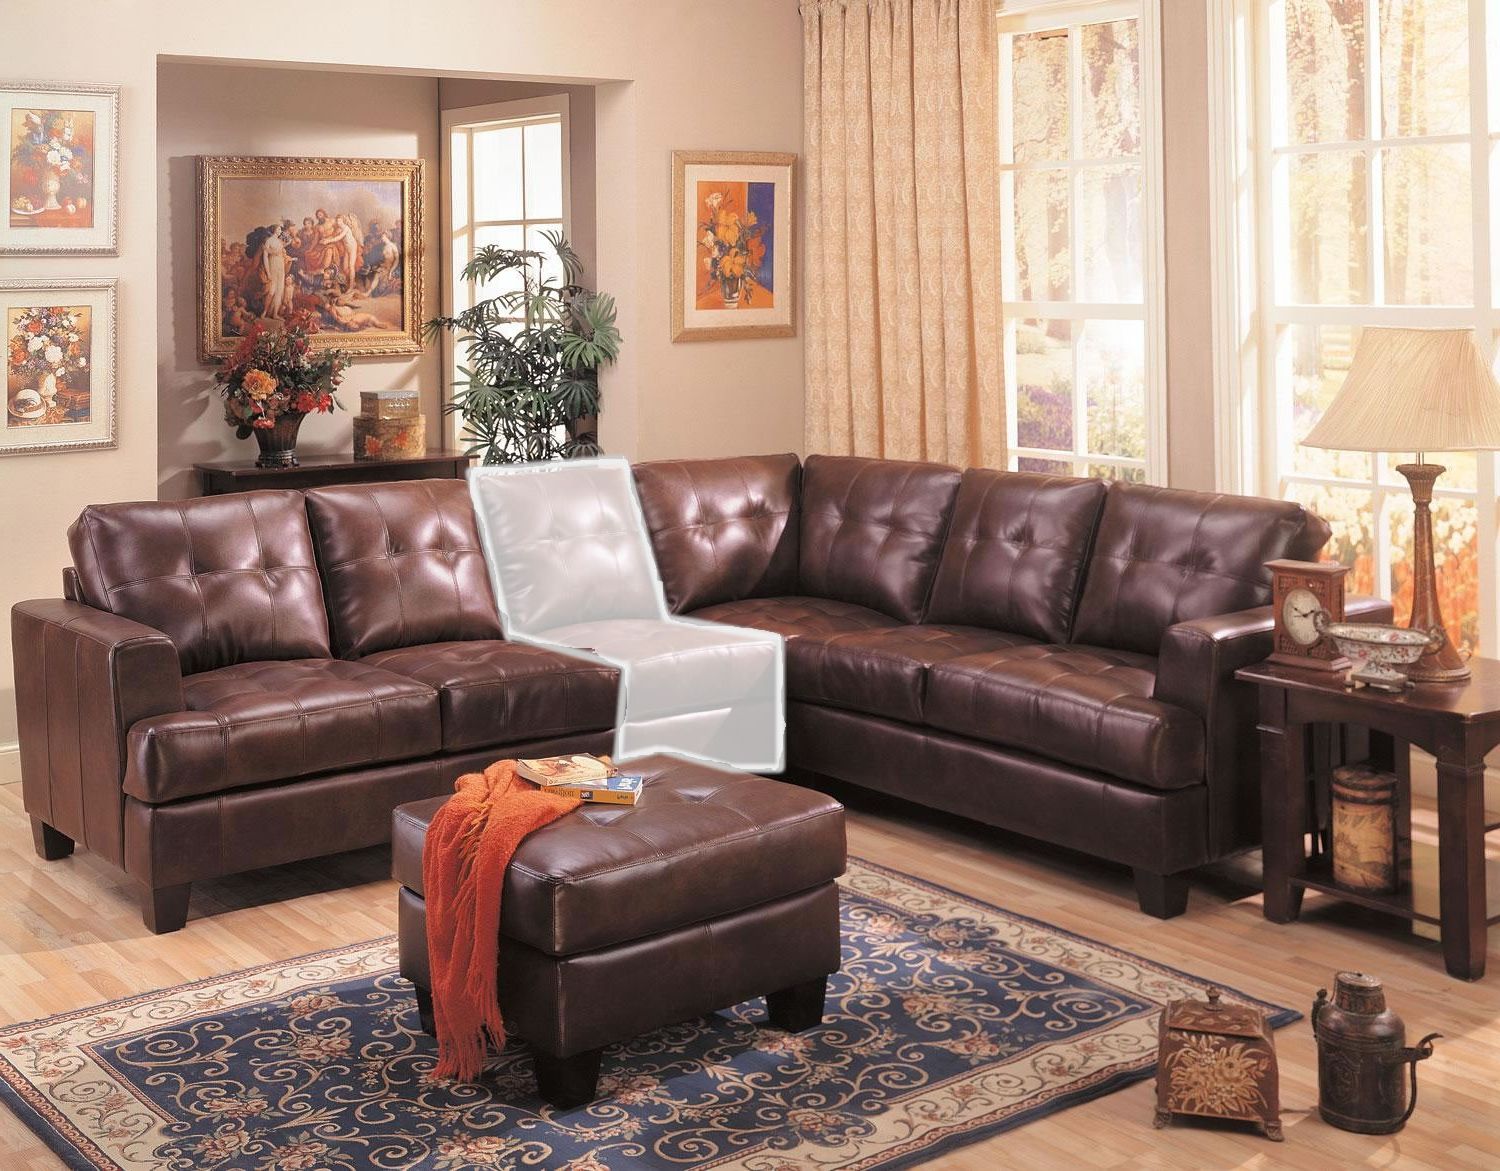 Featured Photo of 15 The Best 3 Piece Leather Sectional Sofa Sets